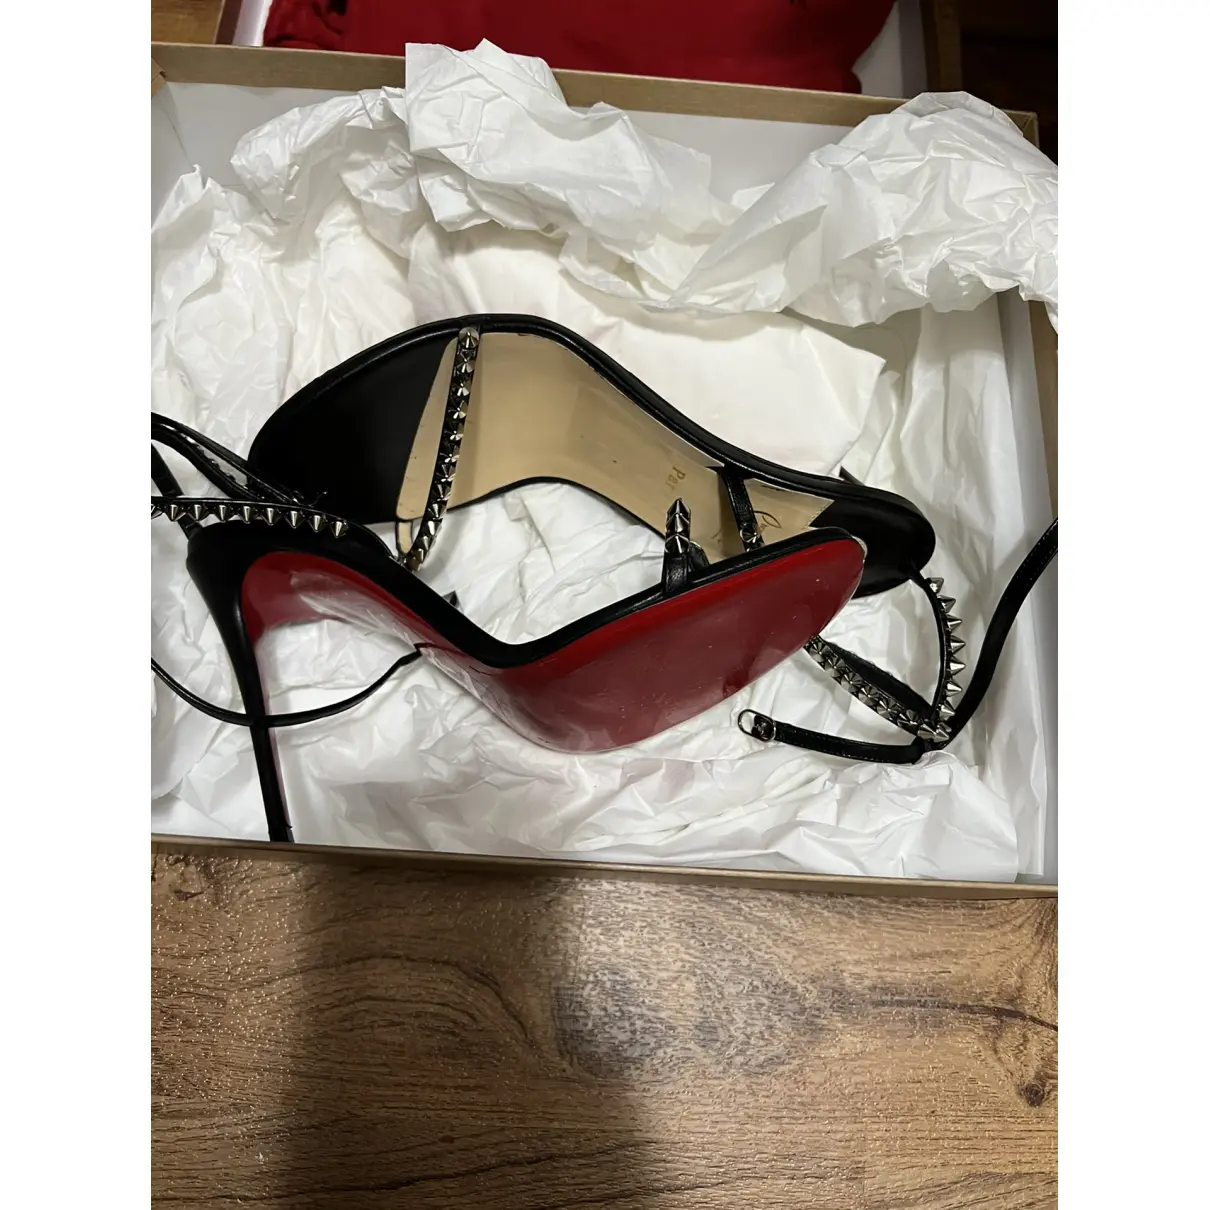 Leather sandals Christian Louboutin